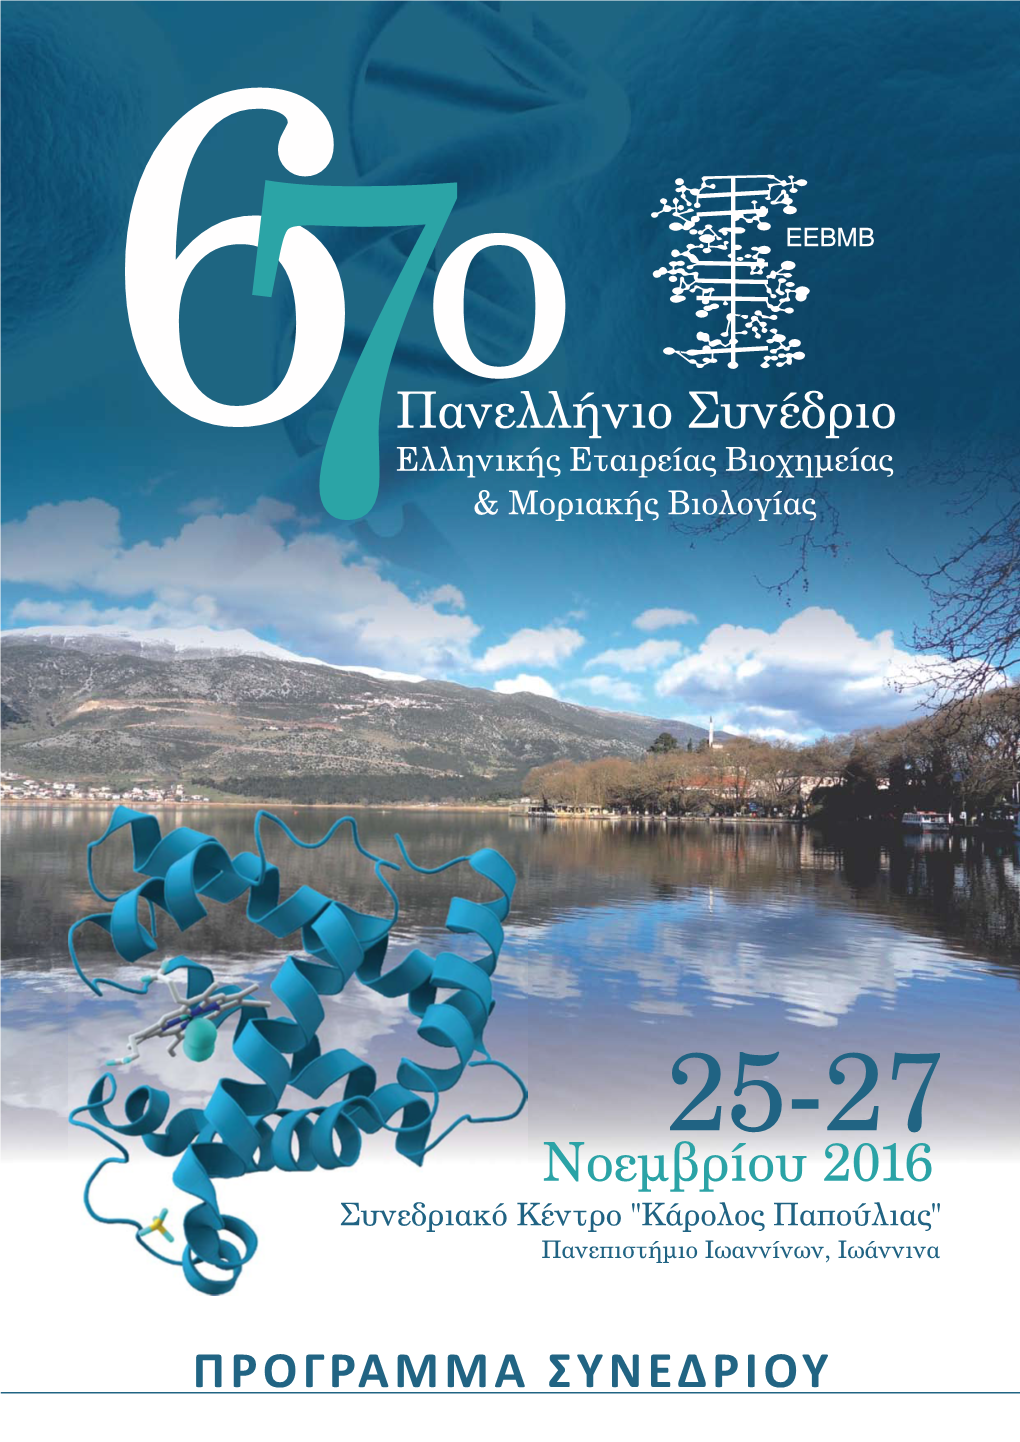 Programme for 2016 Panhellenic Conference